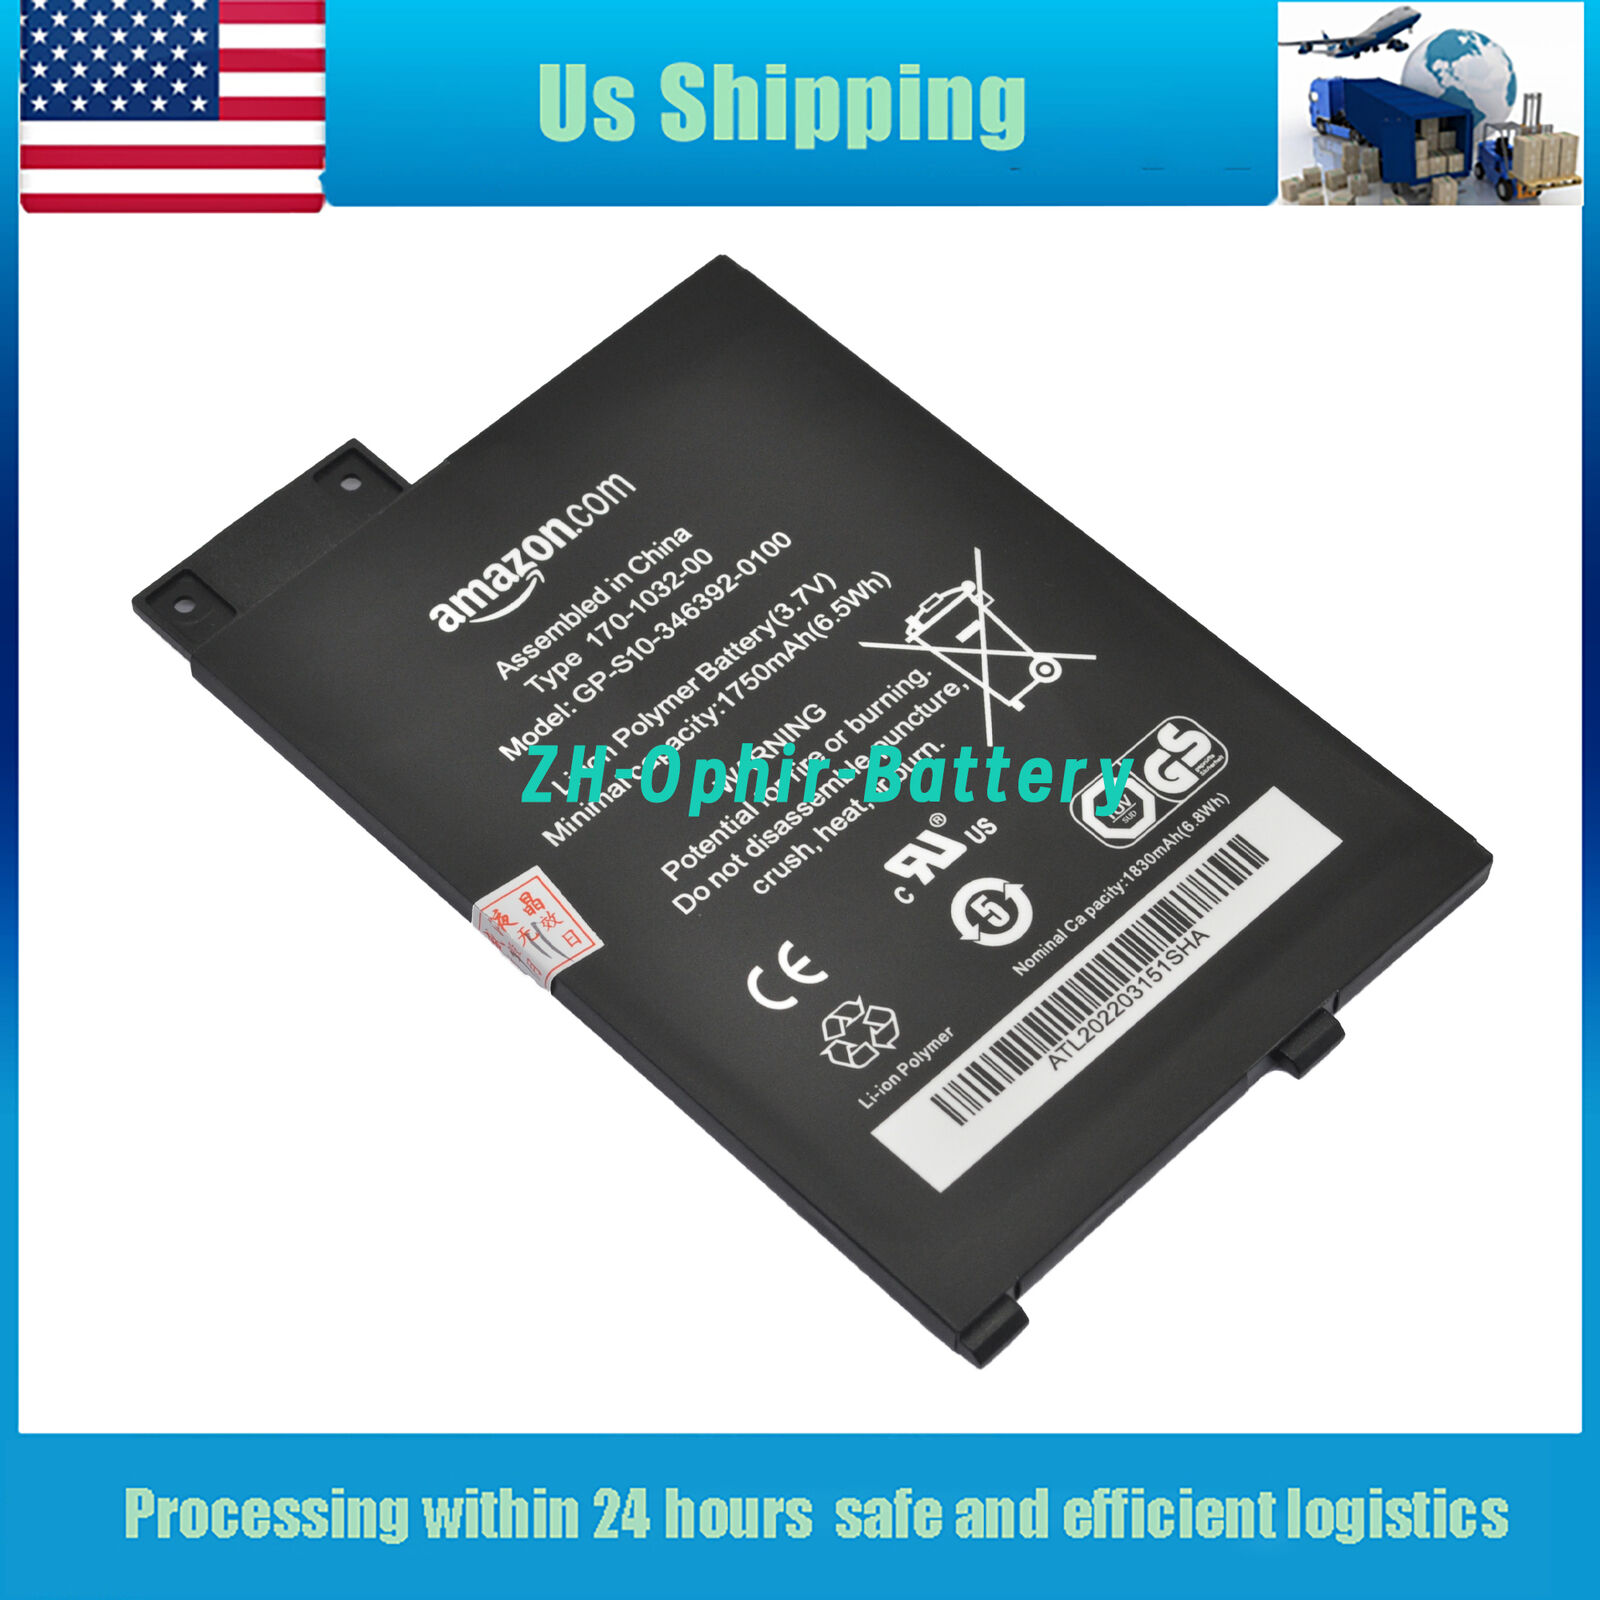 New GP-S10-346392-0100 battery for Amazon Kindle D00901 170-1032-01 S11GTSF01A